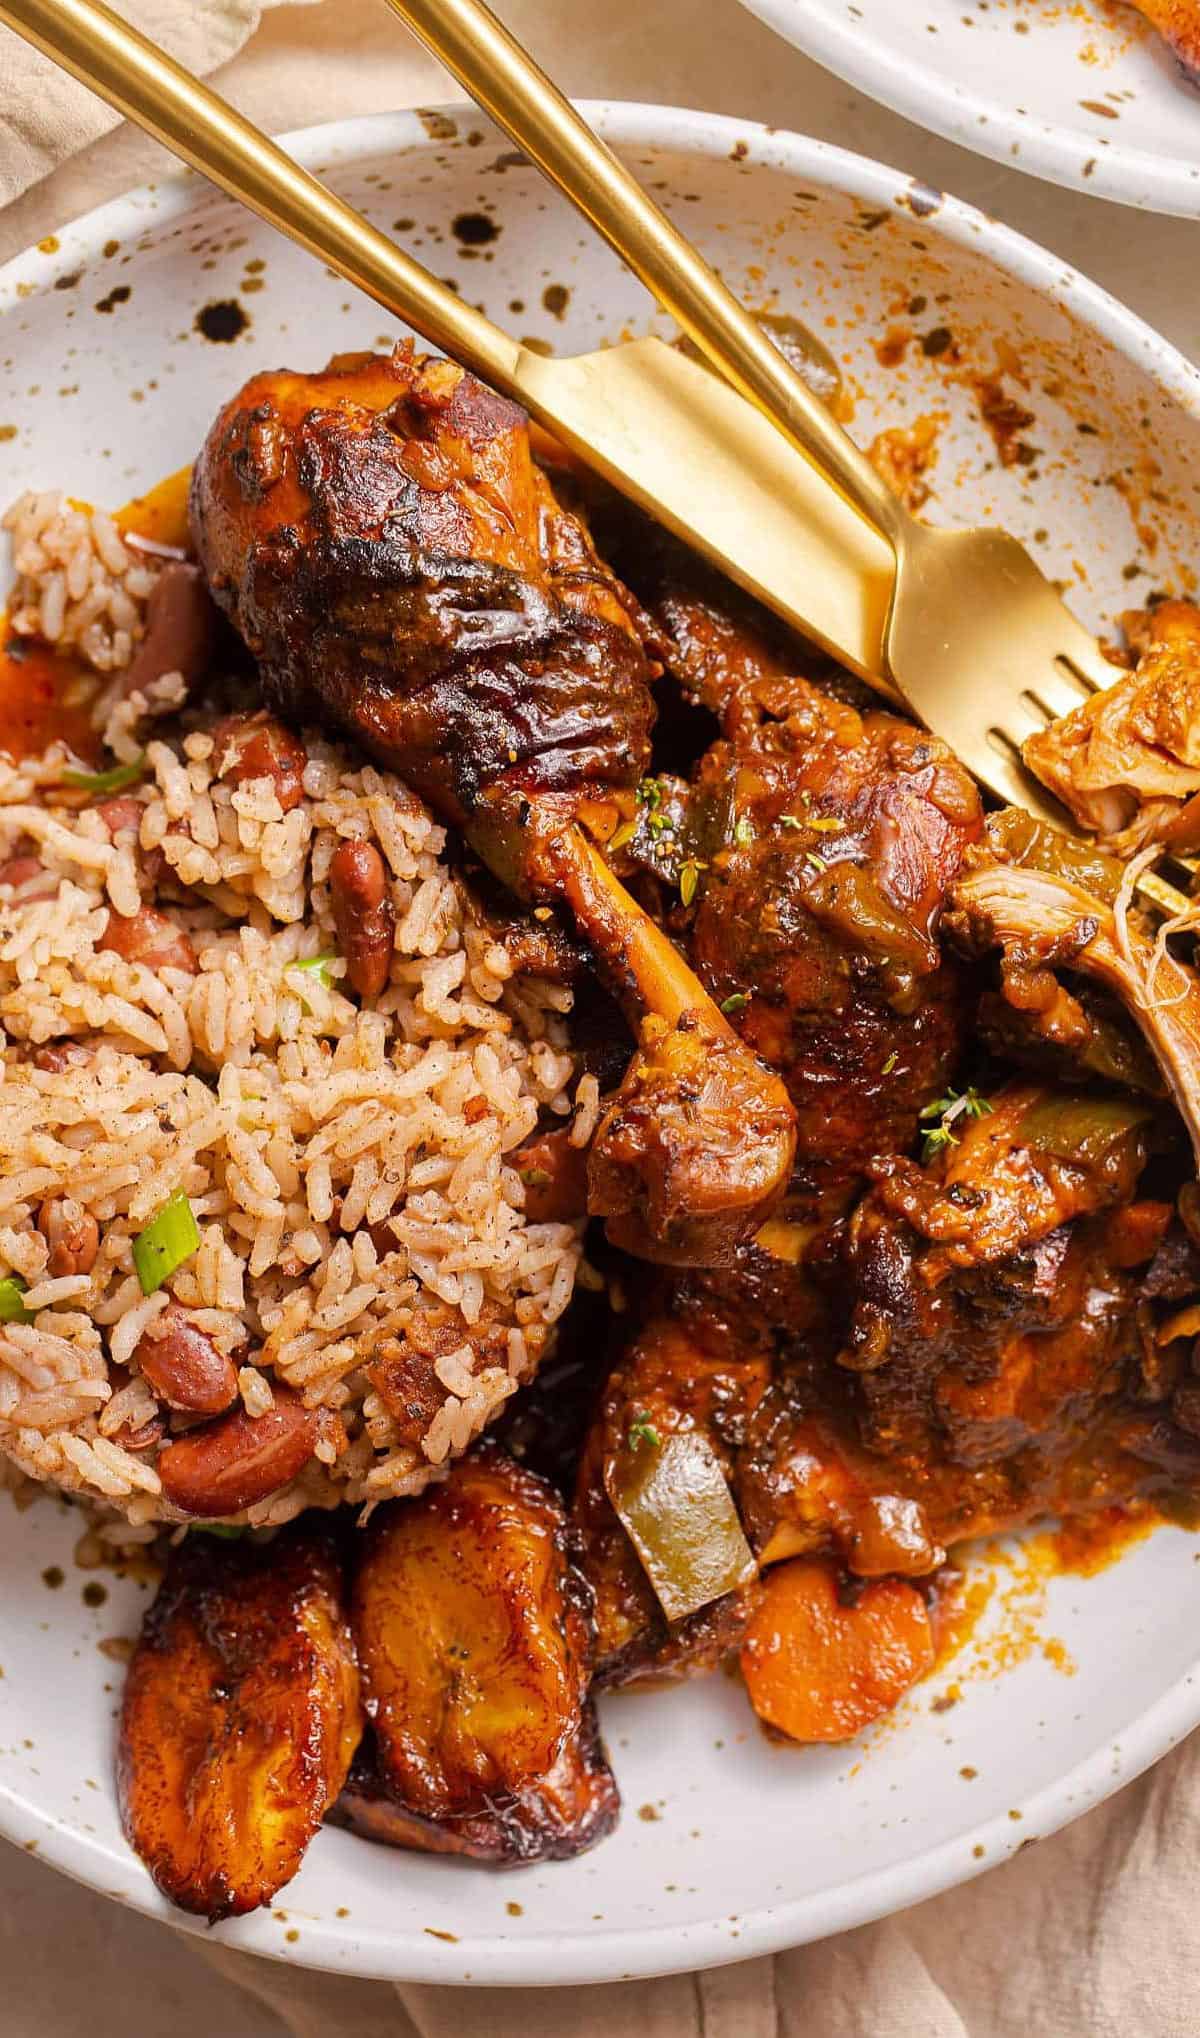  This brown stew chicken recipe will have your taste buds dancing.